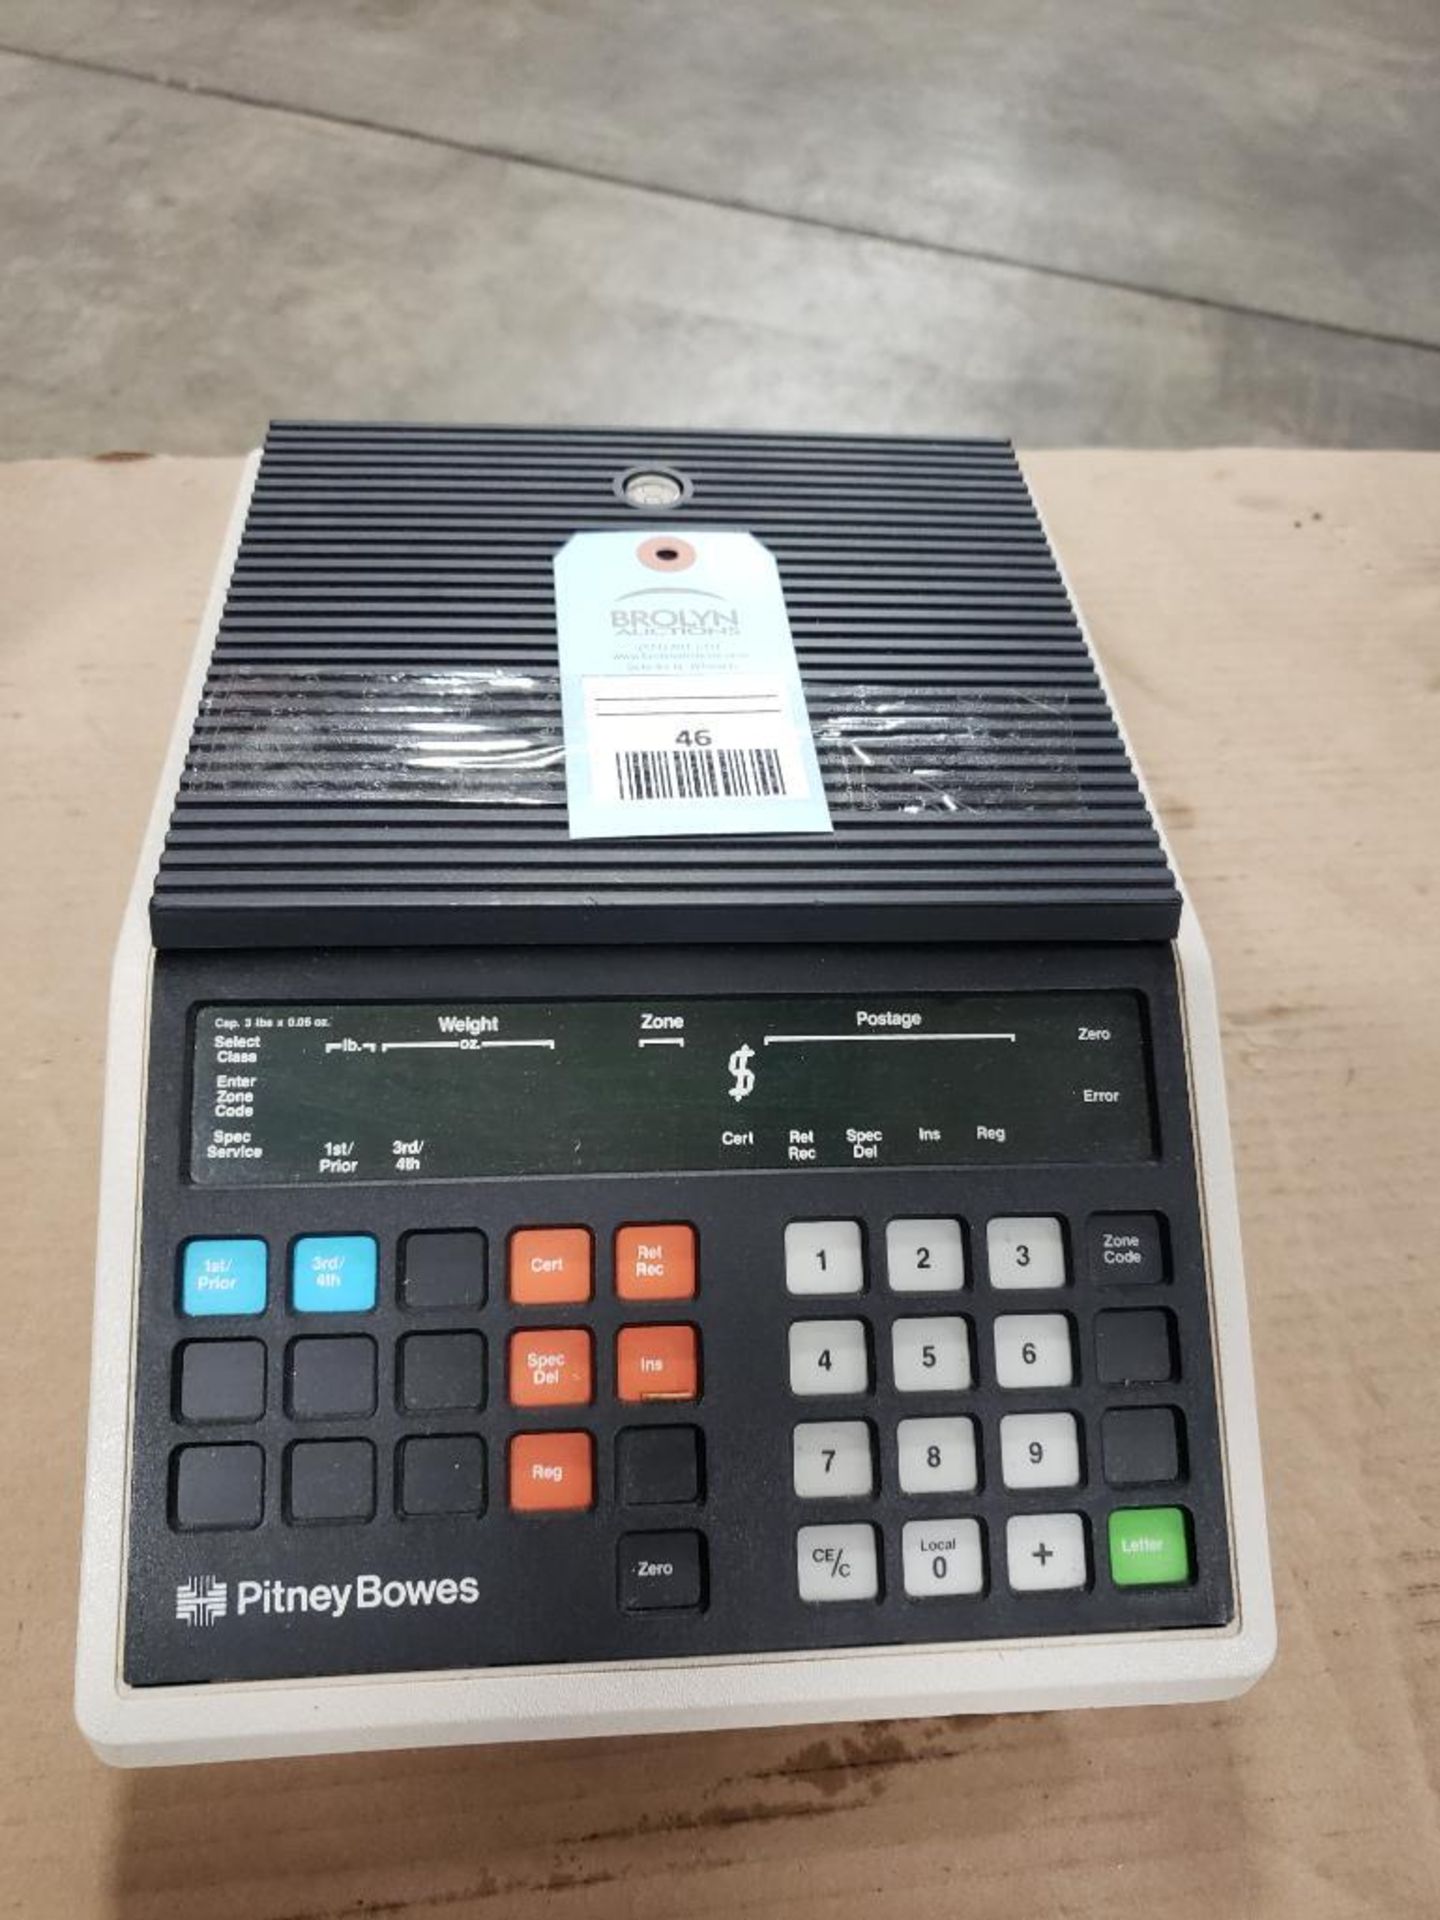 Pitney Bowes A523 digital scale.